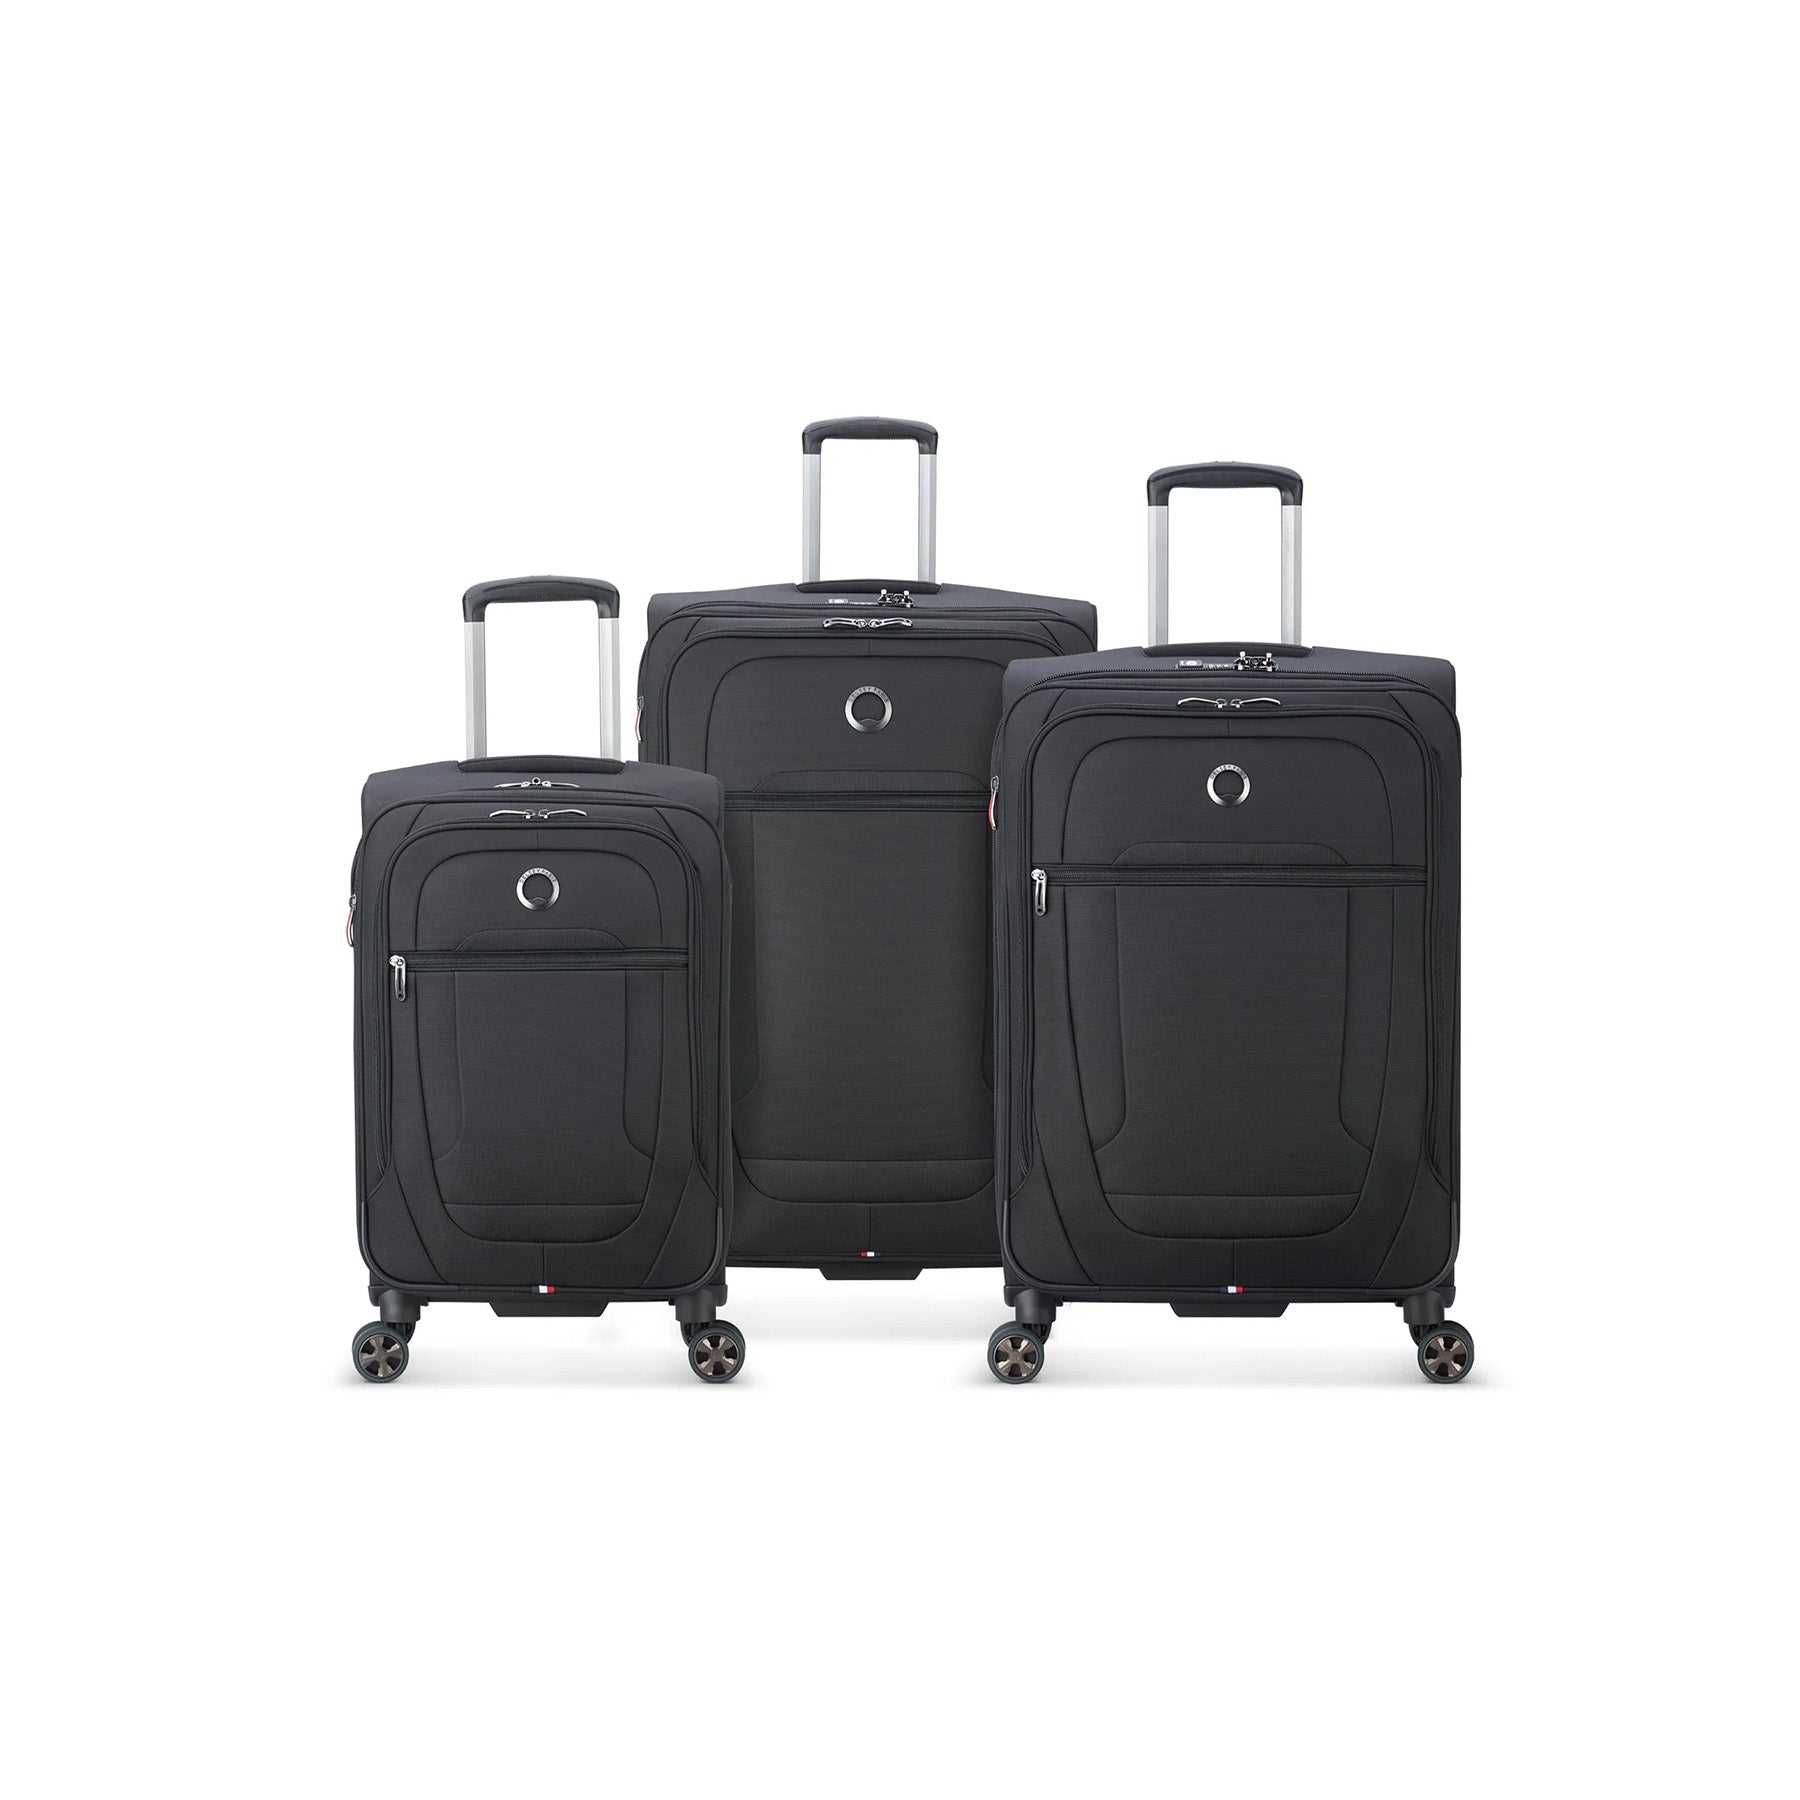 Smart Luggage Features: Double Coil Zippers